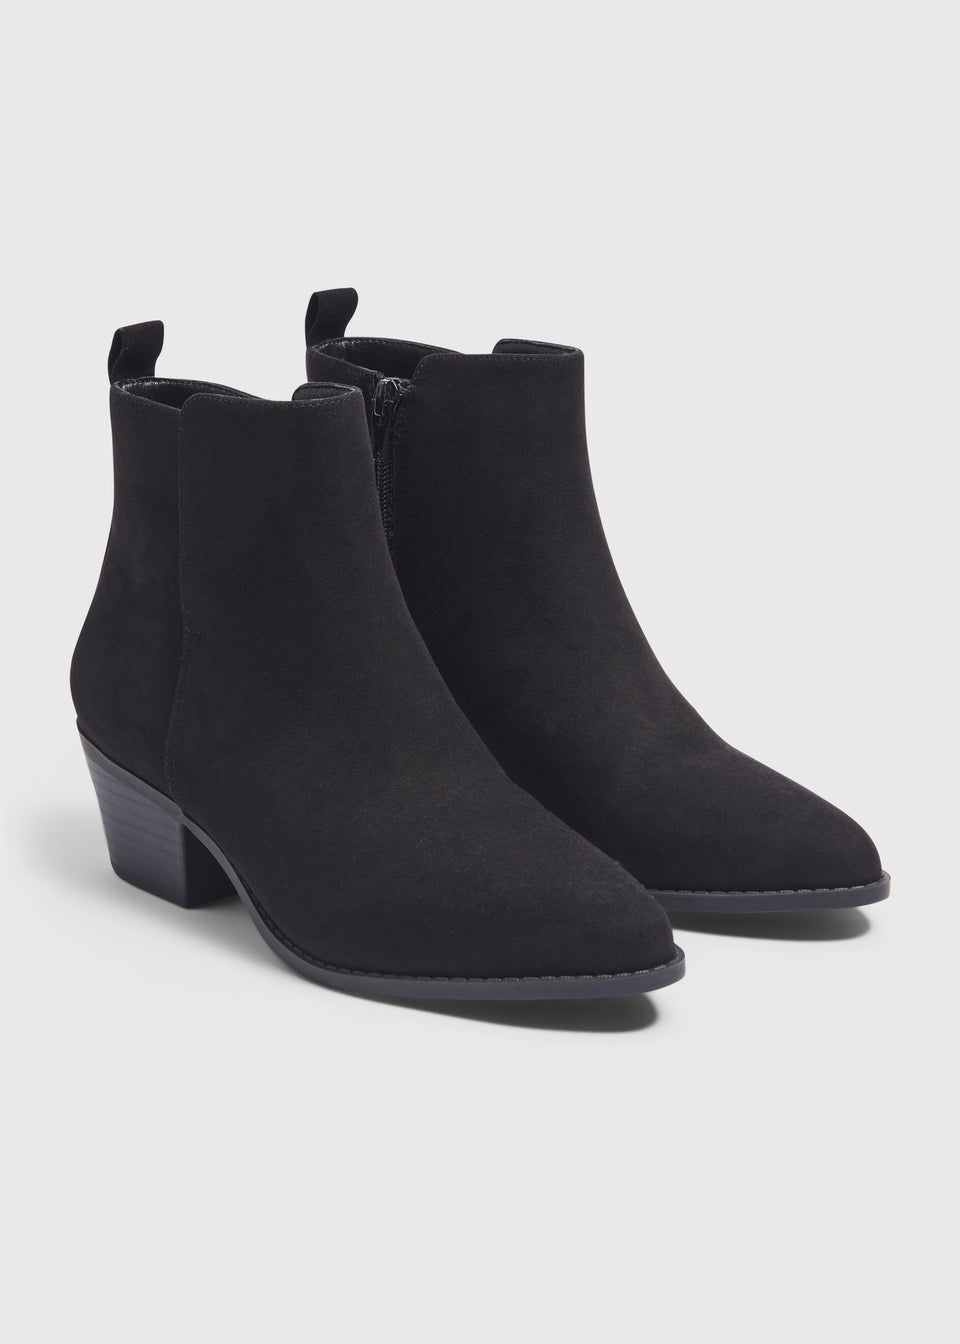 Women's Boots - Heeled, Chelsea & Ankle Boots - Matalan